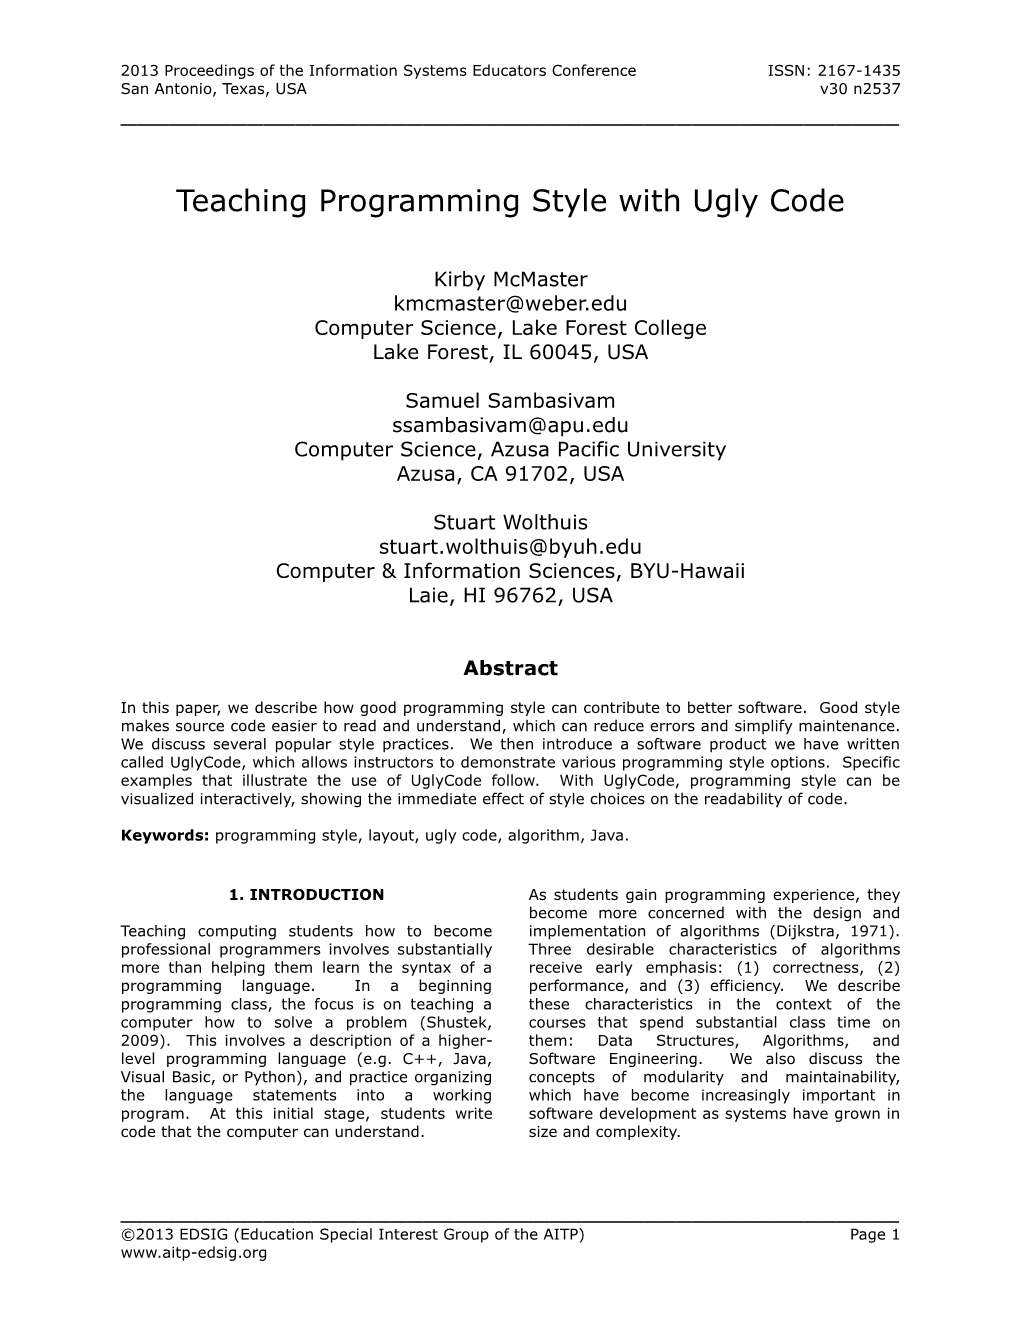 Teaching Programming Style with Ugly Code